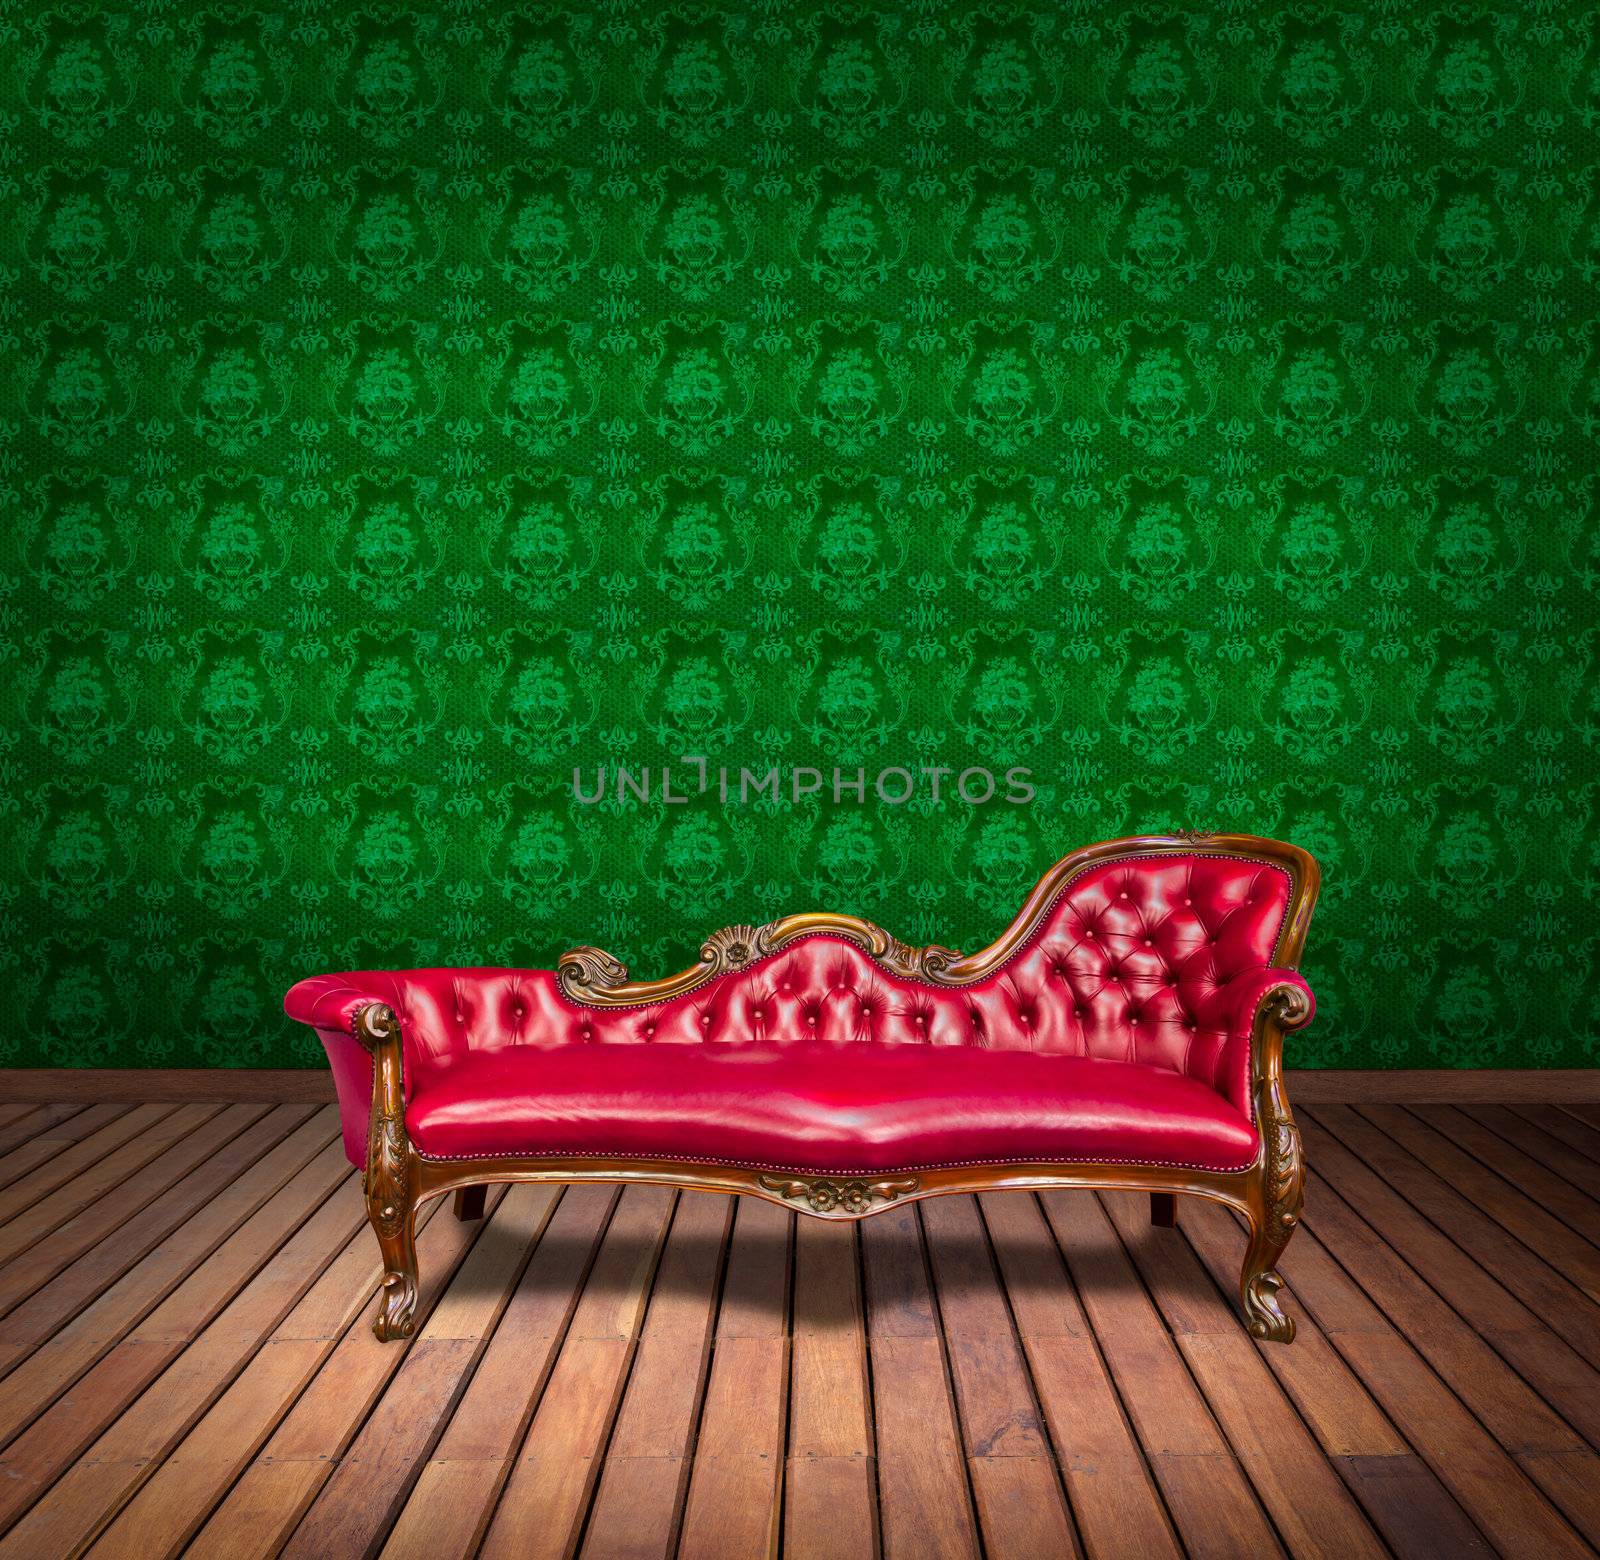 Sofa in green wallpaper room by tungphoto